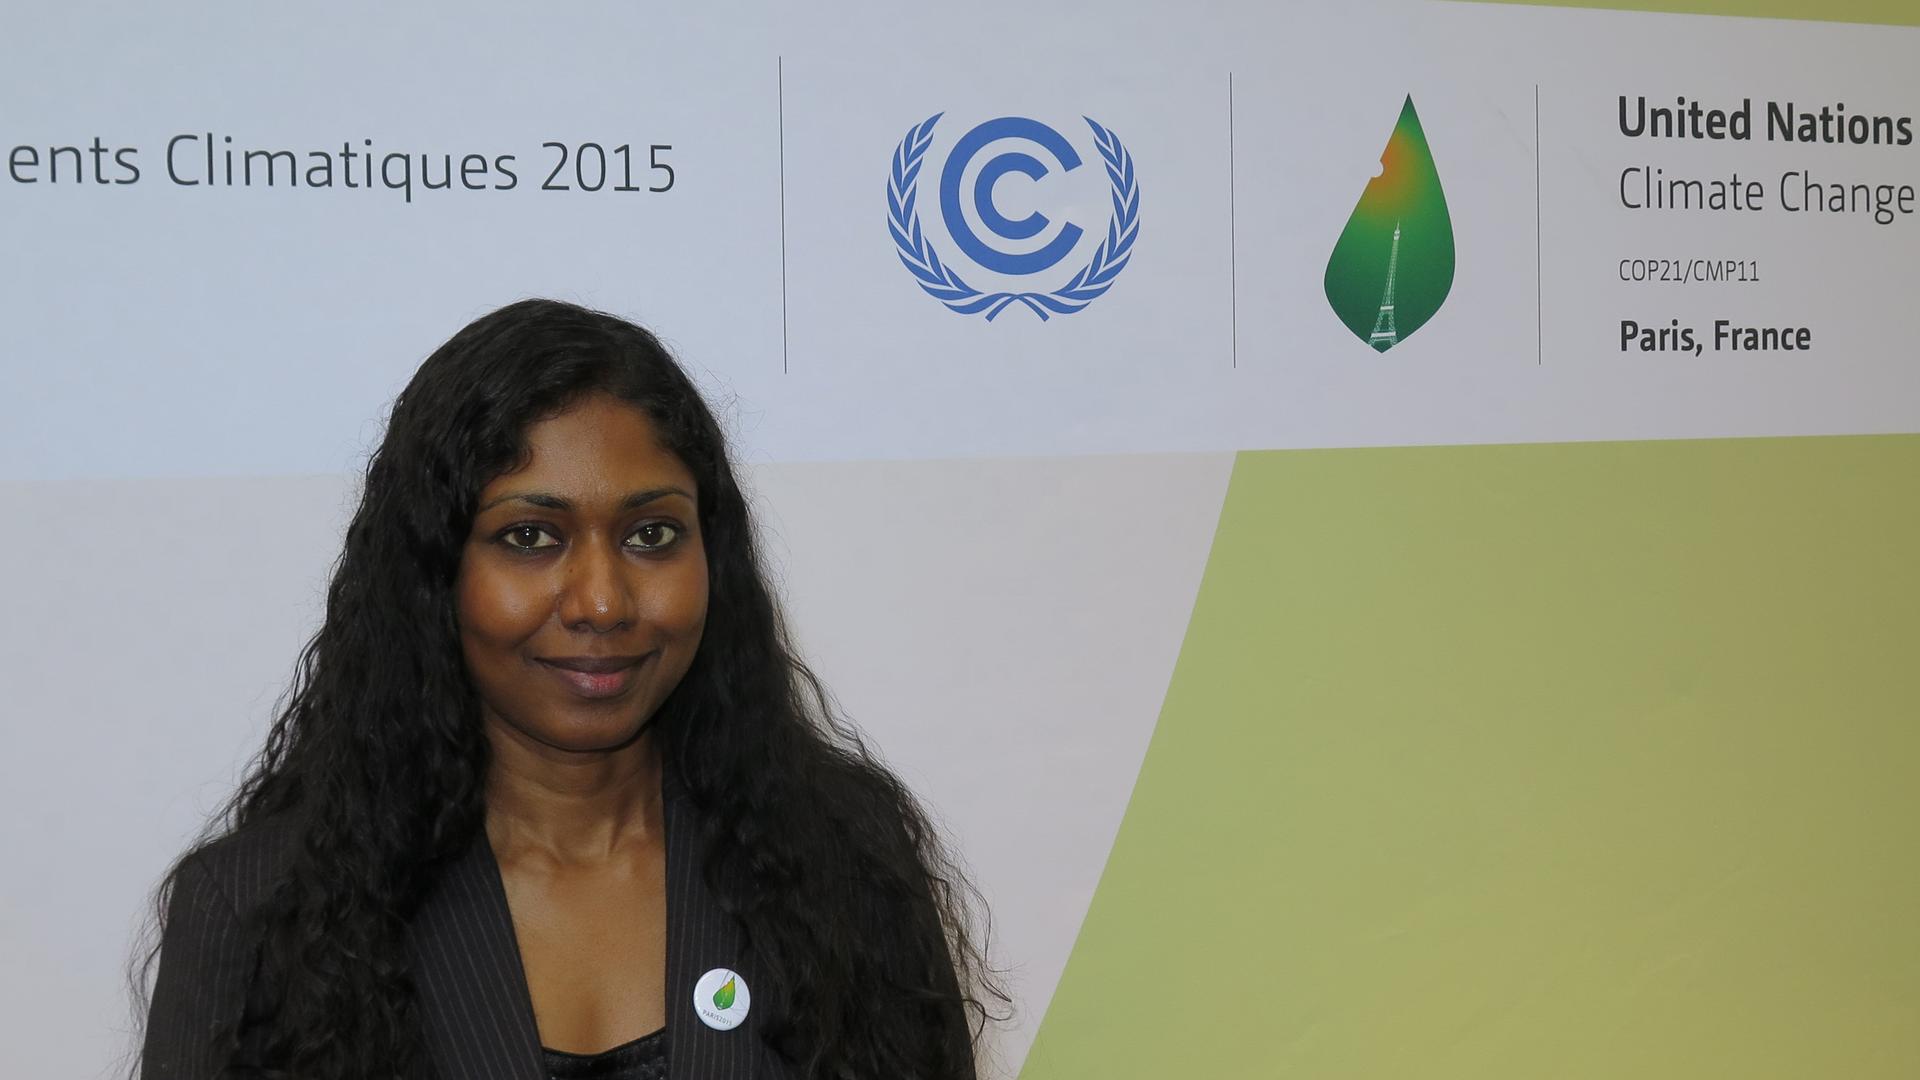 Former Maldives deputy UN ambassador Thilmeeza Hussain at the global climate conference in Paris in December, 2015, just before the adoption of the landmark Paris Agreement. With a suddenly very different political environment in the US, Hussain says clim